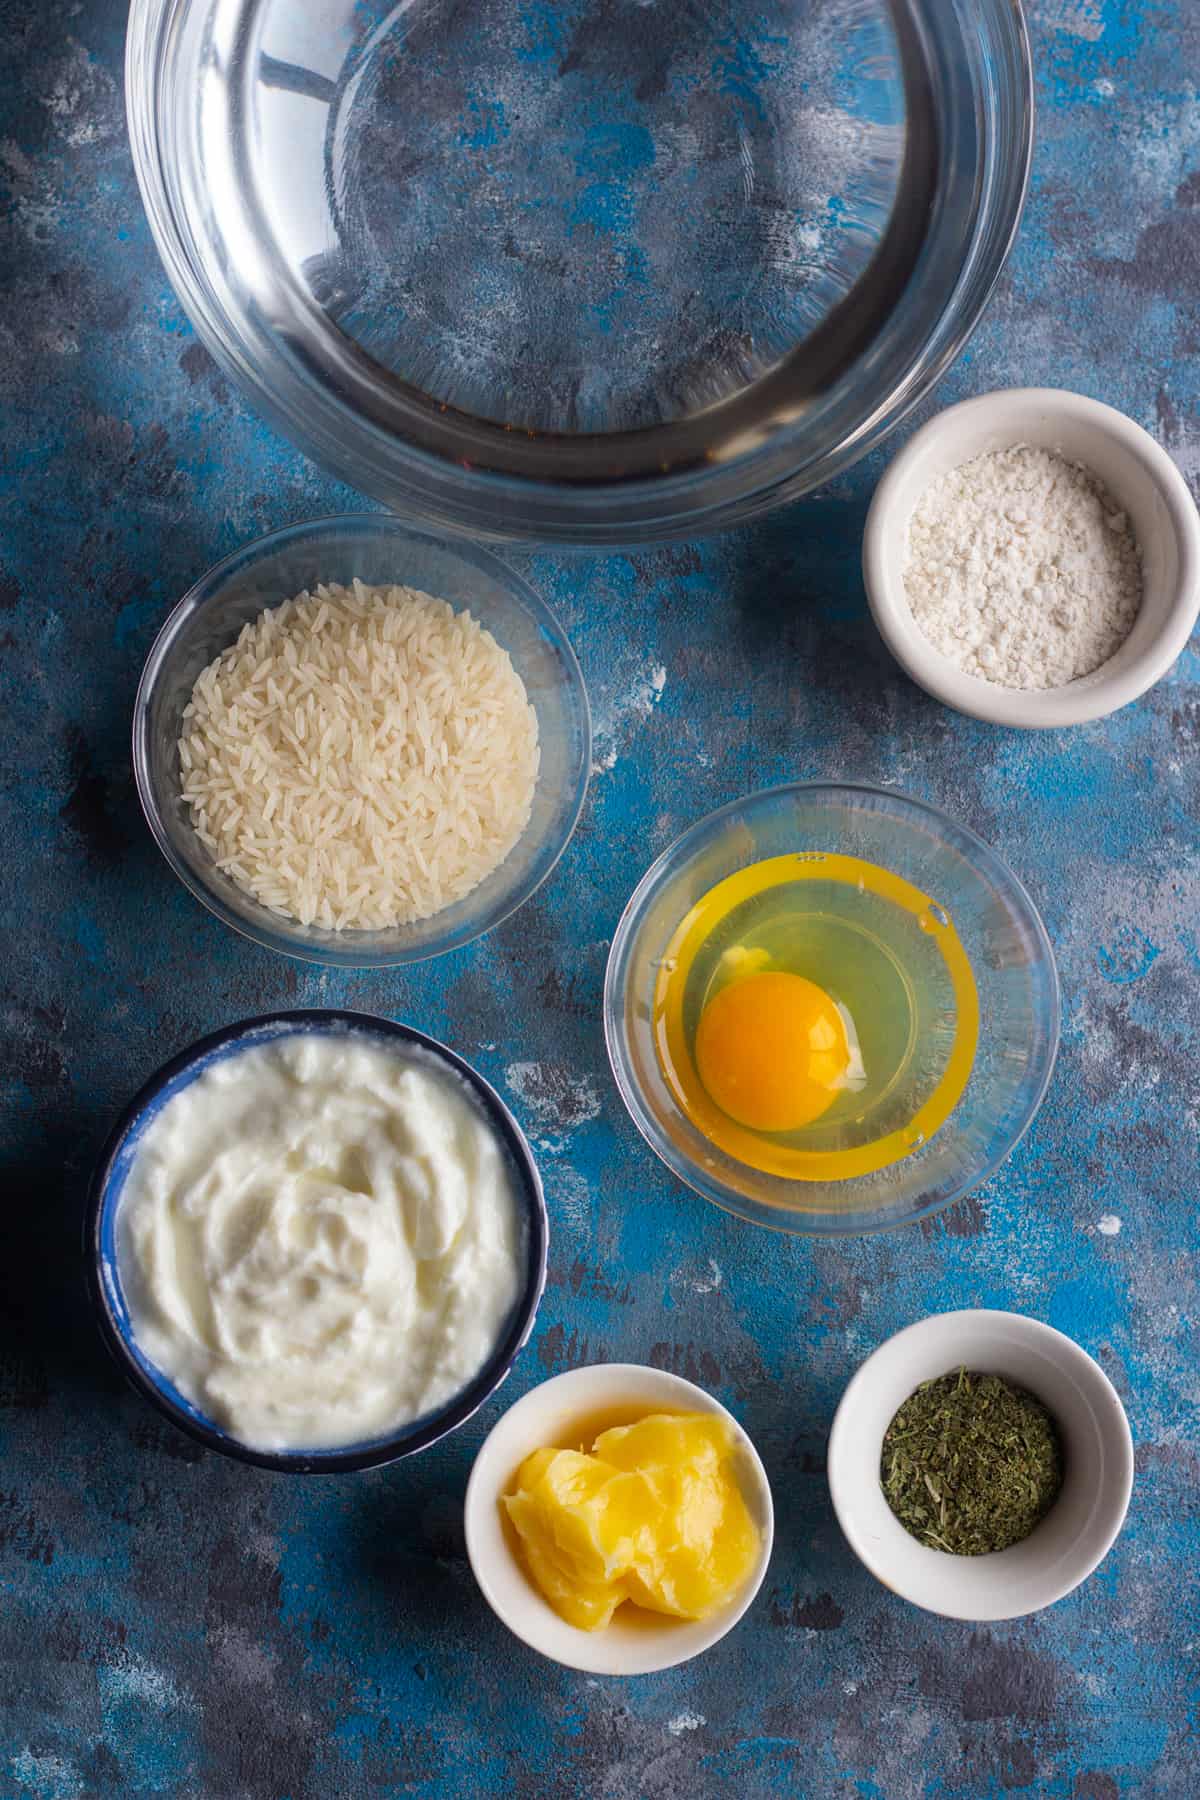 To make warm yogurt soup, you need the following ingredients: Rice: preferably basmati or any long grain. Yogurt: we need plain yogurt, preferably Greek yogurt. Egg Flour Butter Dried mint: you can find dried mint on amazon or at local Middle Eastern and Mediterranean shops.